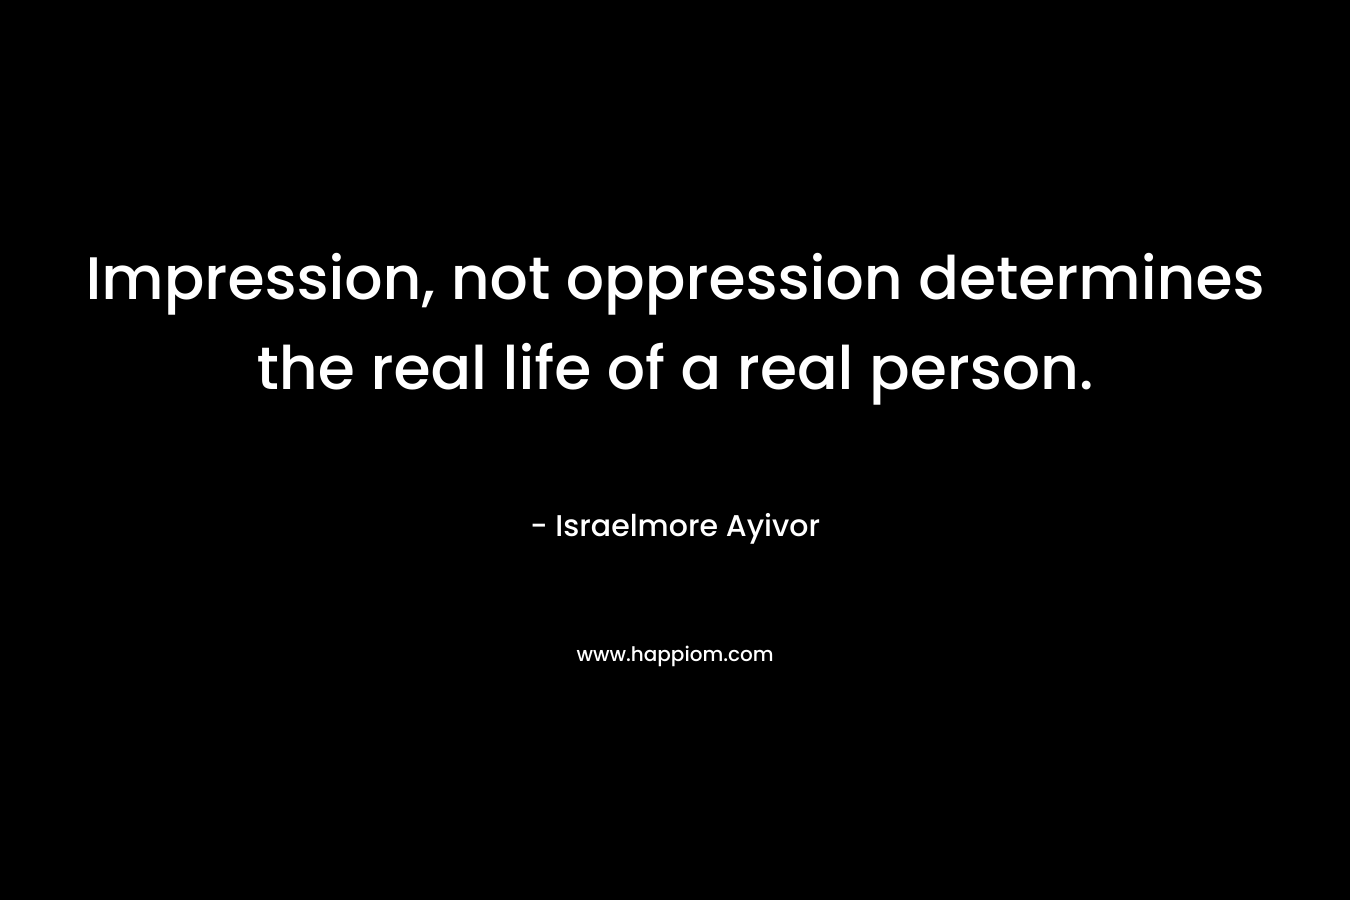 Impression, not oppression determines the real life of a real person.